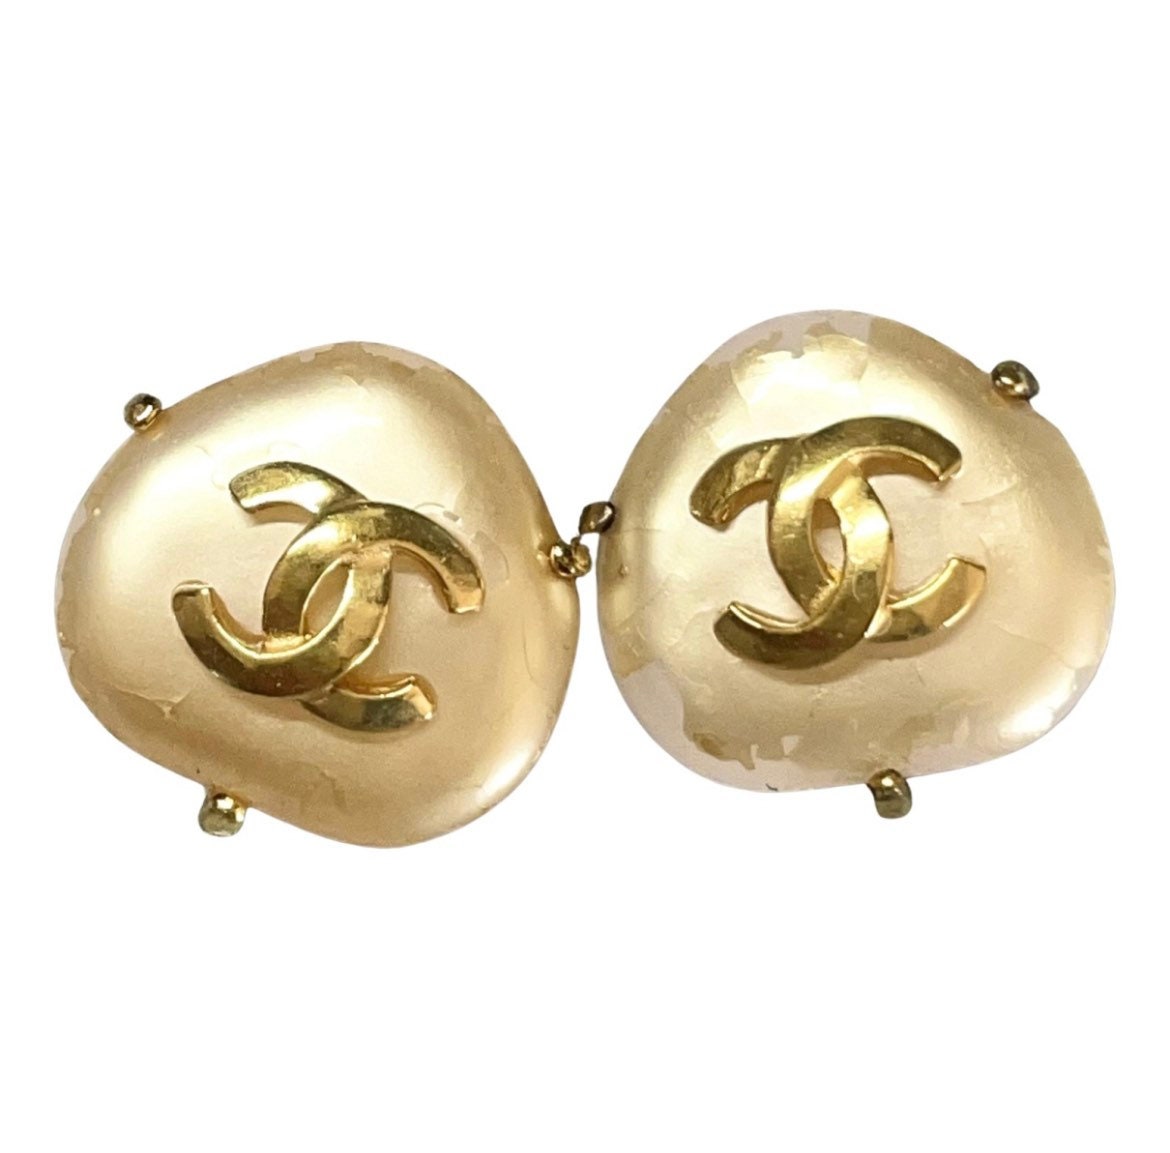 Chanel Earrings 96p Coco Mark Gold Plated Ear Accessories Cc